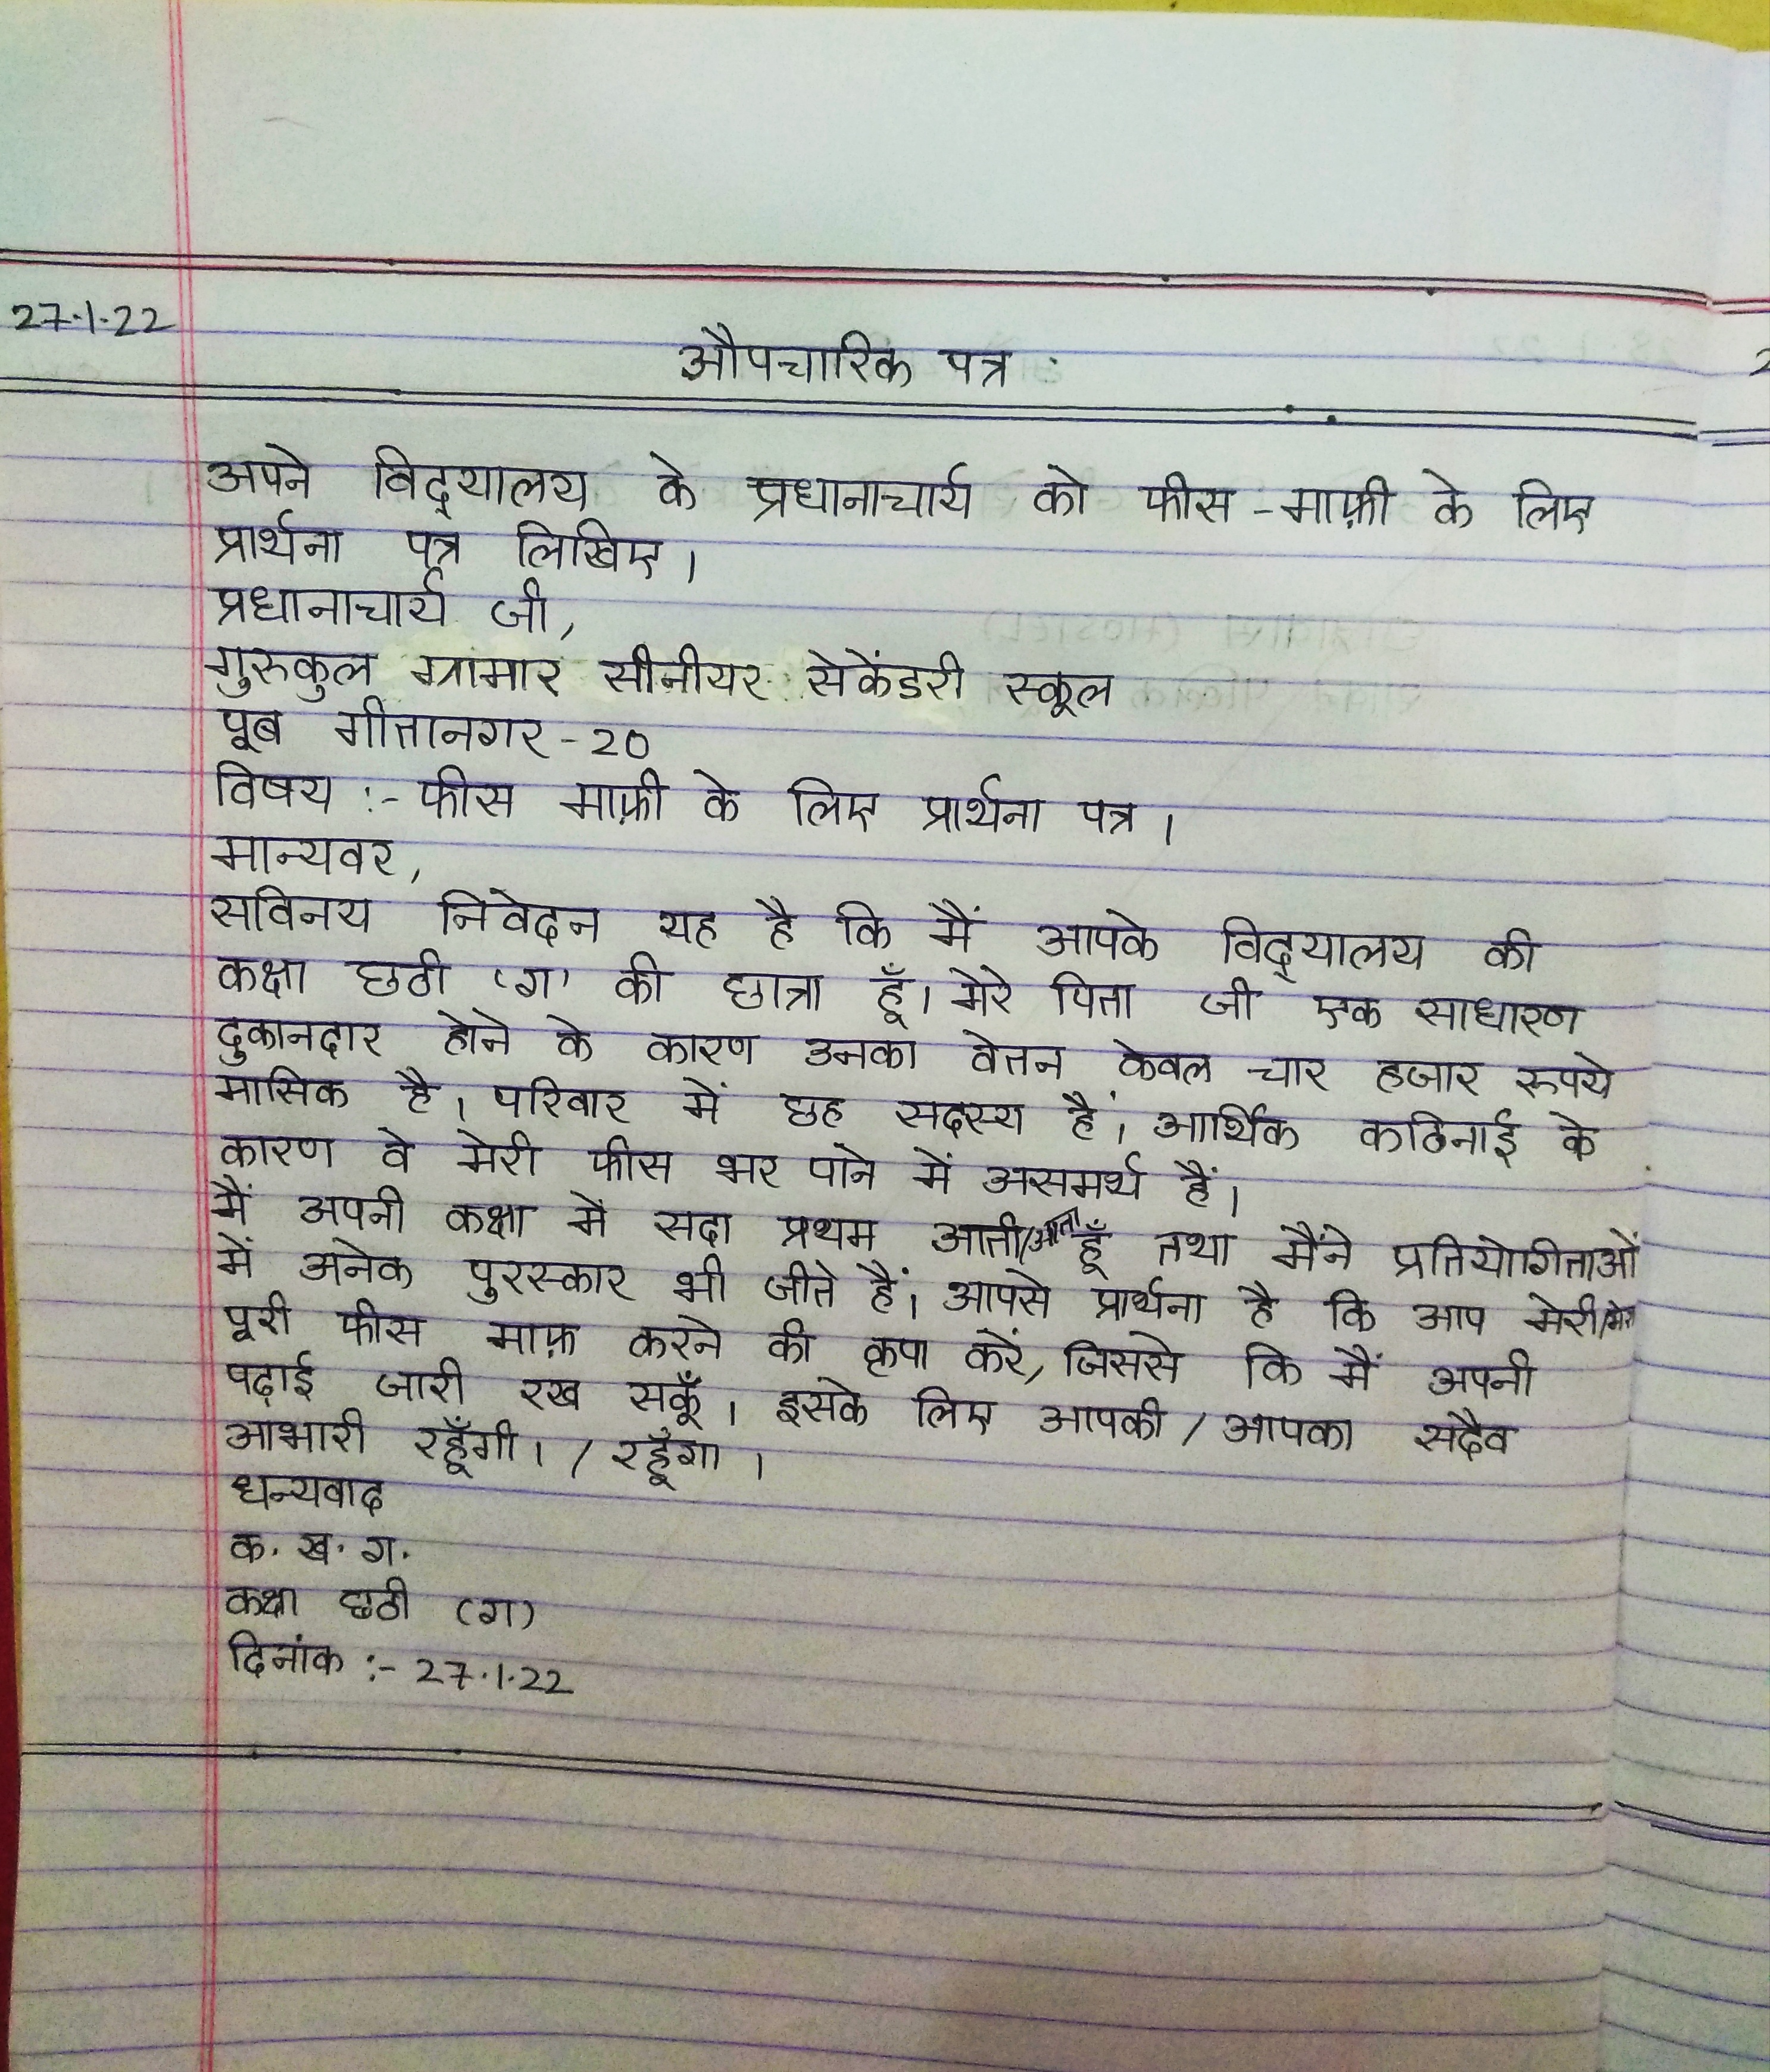 formal letter writing in hindi